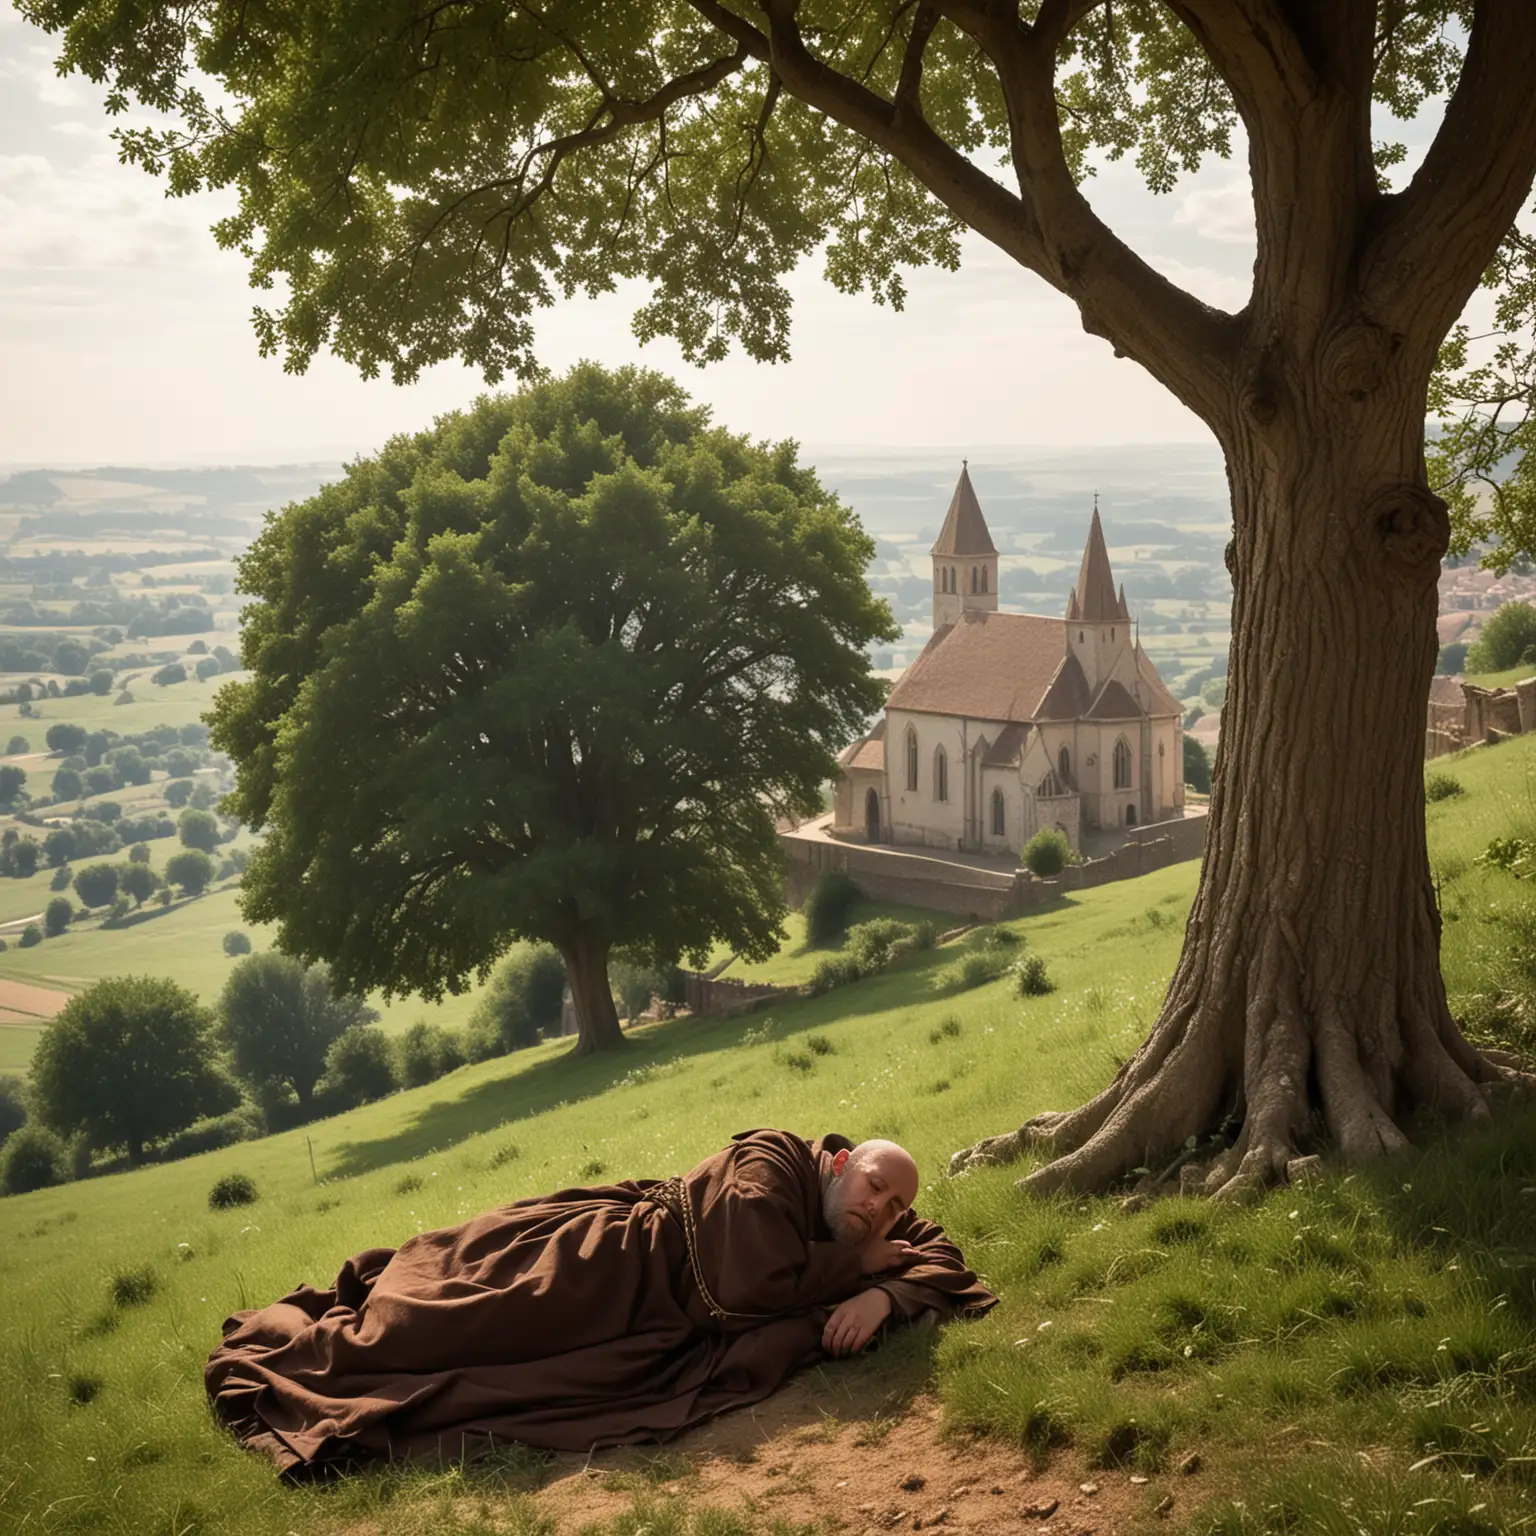 Medieval Friar Monk Sleeping Under Tree with Church in Distance